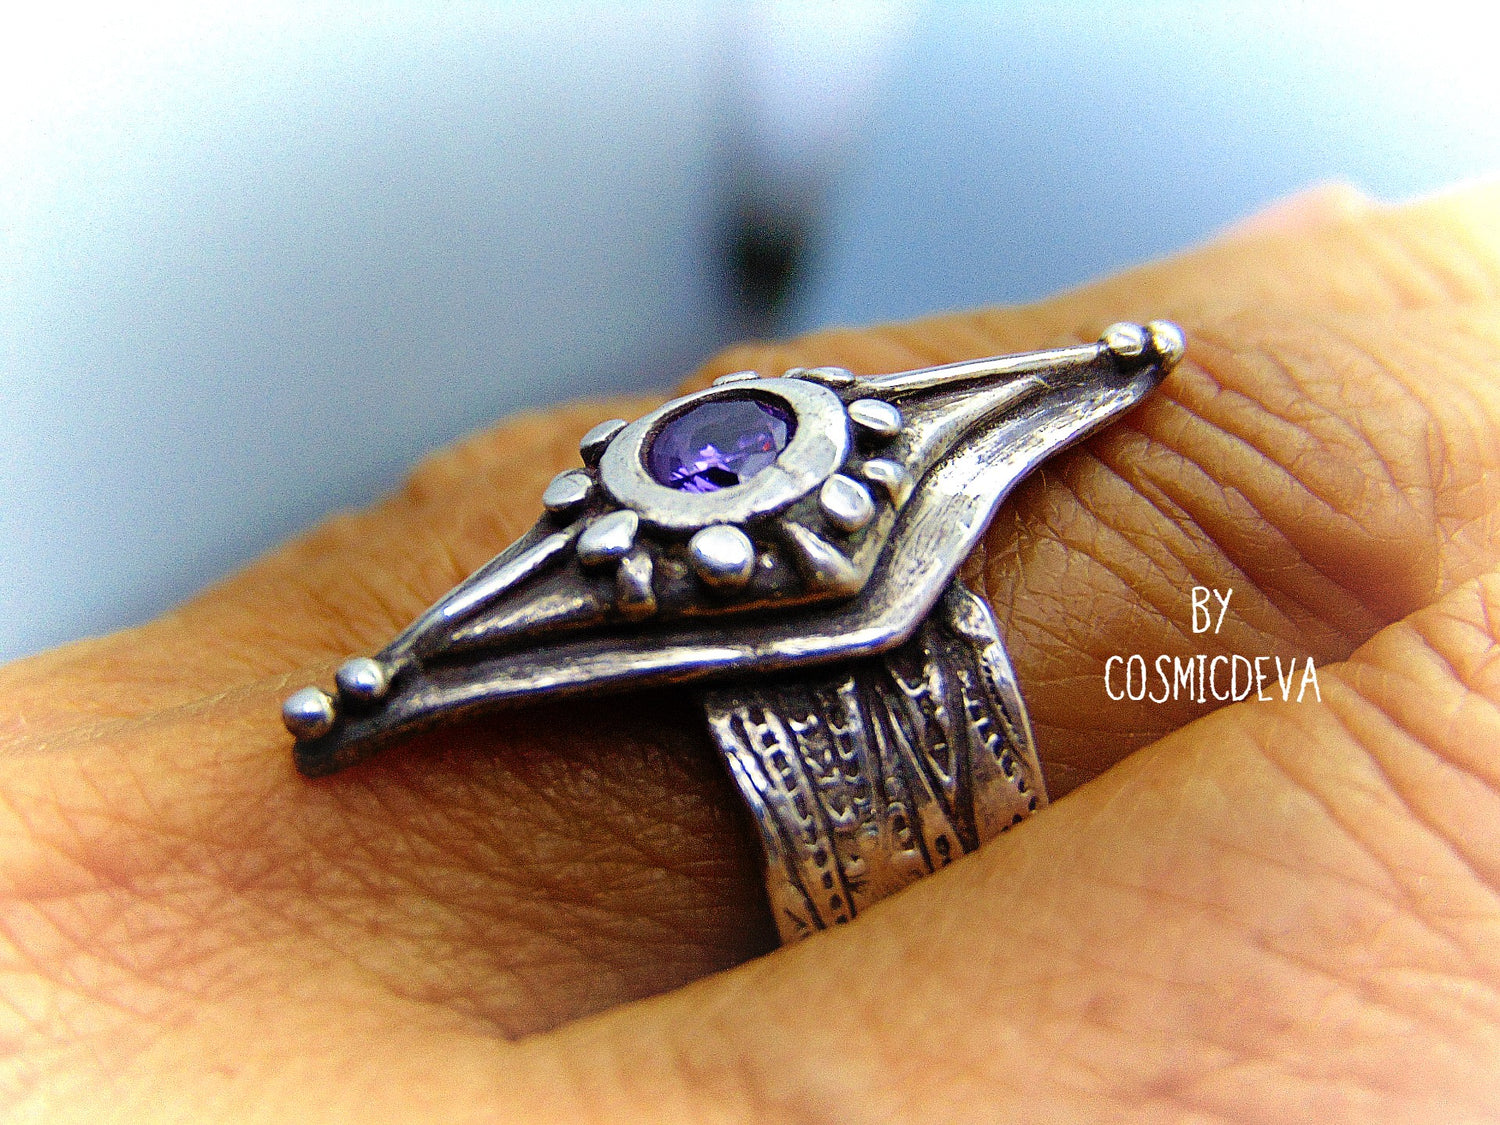 Medieval Wide Band Sterling Silver Shield Ring with Amethyst, Size 8 Ring. Unique and stunning handcrafted diamond shape shield sterling silver ring with a 5 mm round amethyst sto. ne. This Ring is made of .950 sterling silver and hallmarked as it. The ring was oxidized to give it a vintage antique design. - CosmicDeva